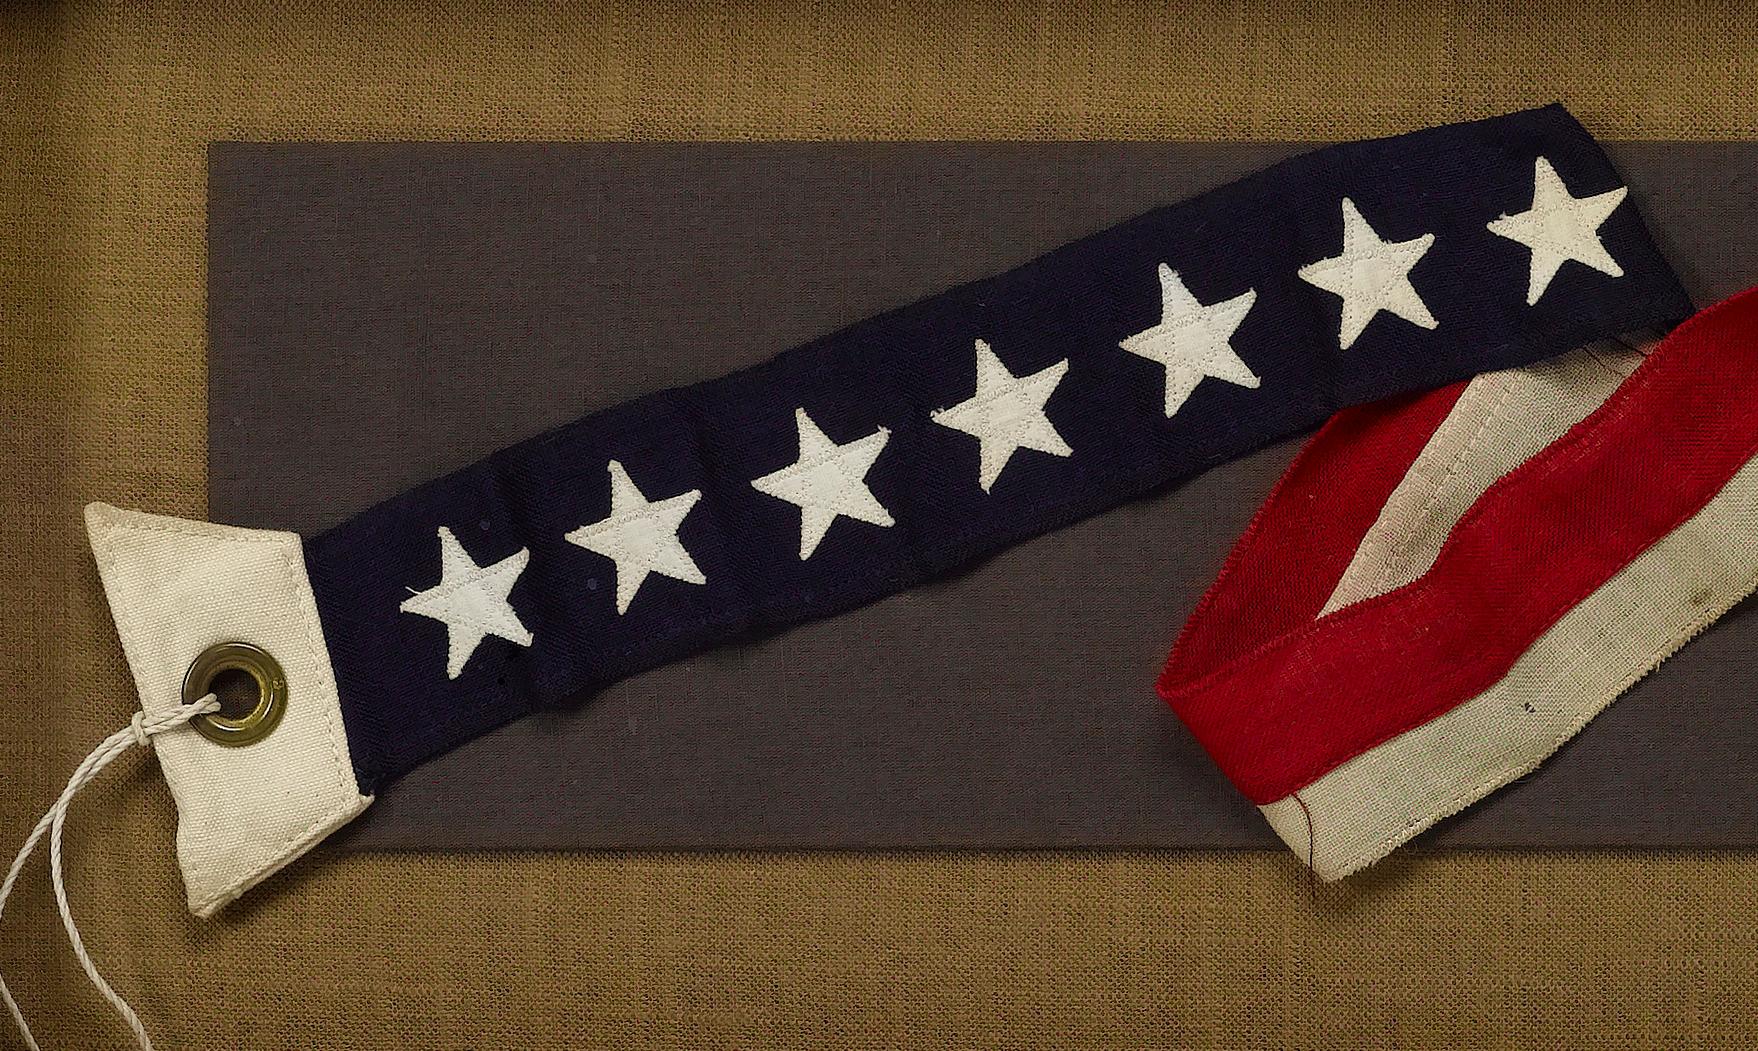 This is a 7-Star Naval Commissioning Pennant, circa 1892-WWI. A naval commissioning pennant is flown at all times as long as a ship is in commissioned status, except when a flag officer or civilian official is embarked and flies his personal flag in